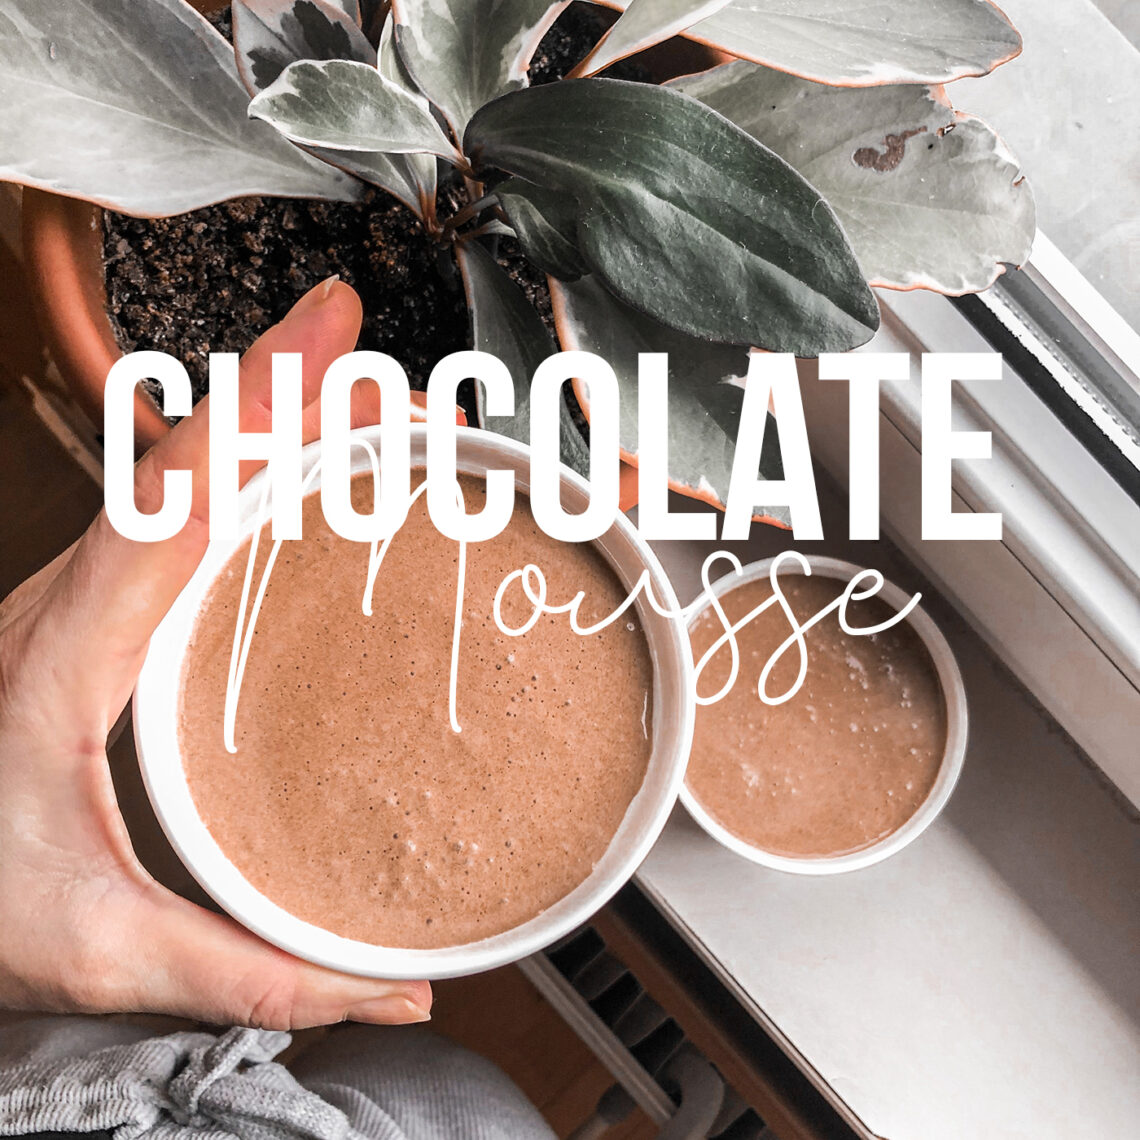 The easiest diet chocolate mousse recipe